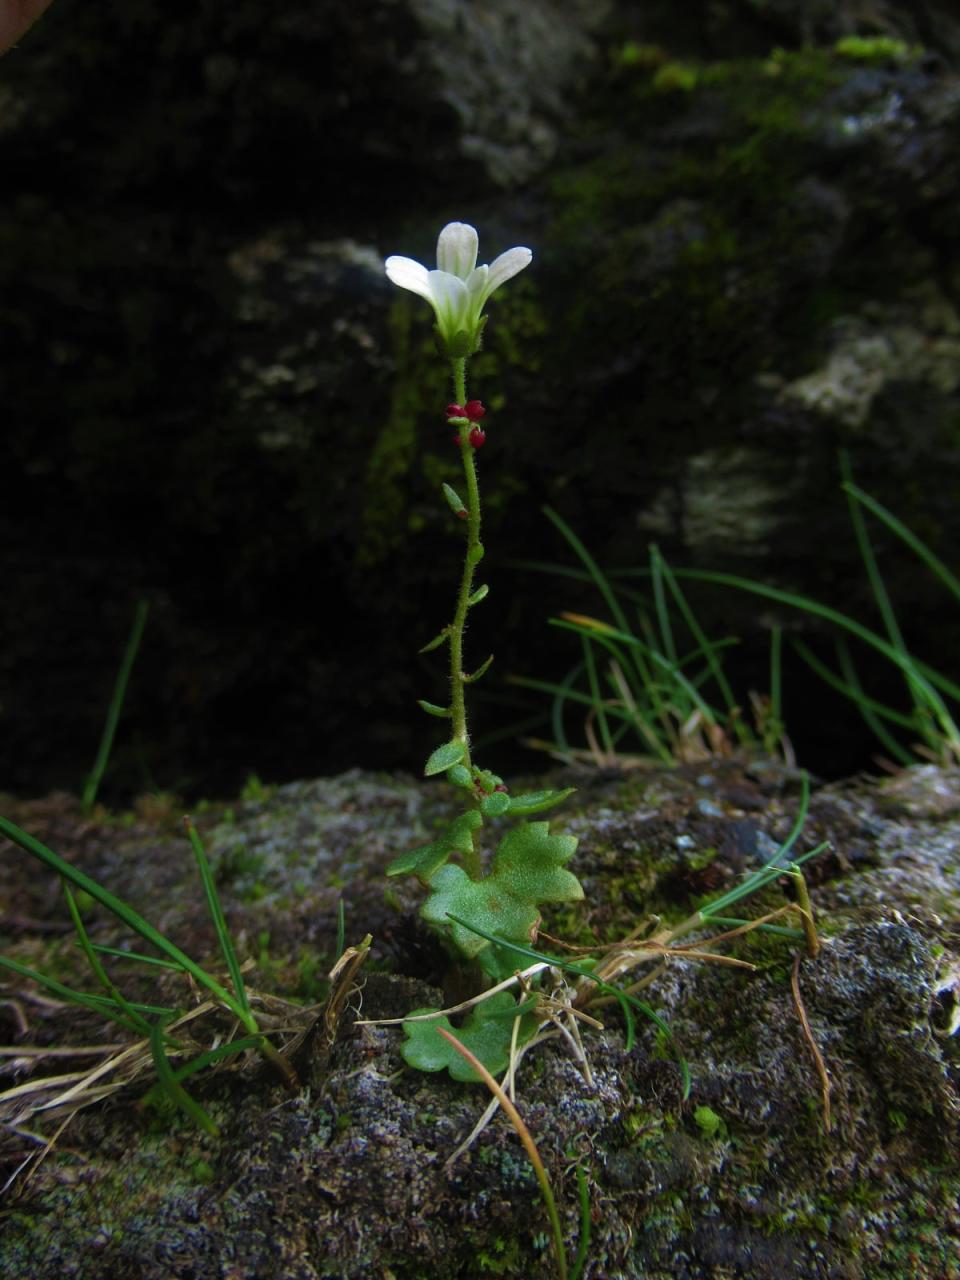 Drooping saxifrage is among the species that could become extinct due to global warming, research has found. (Sarah Watts/University of Stirling)